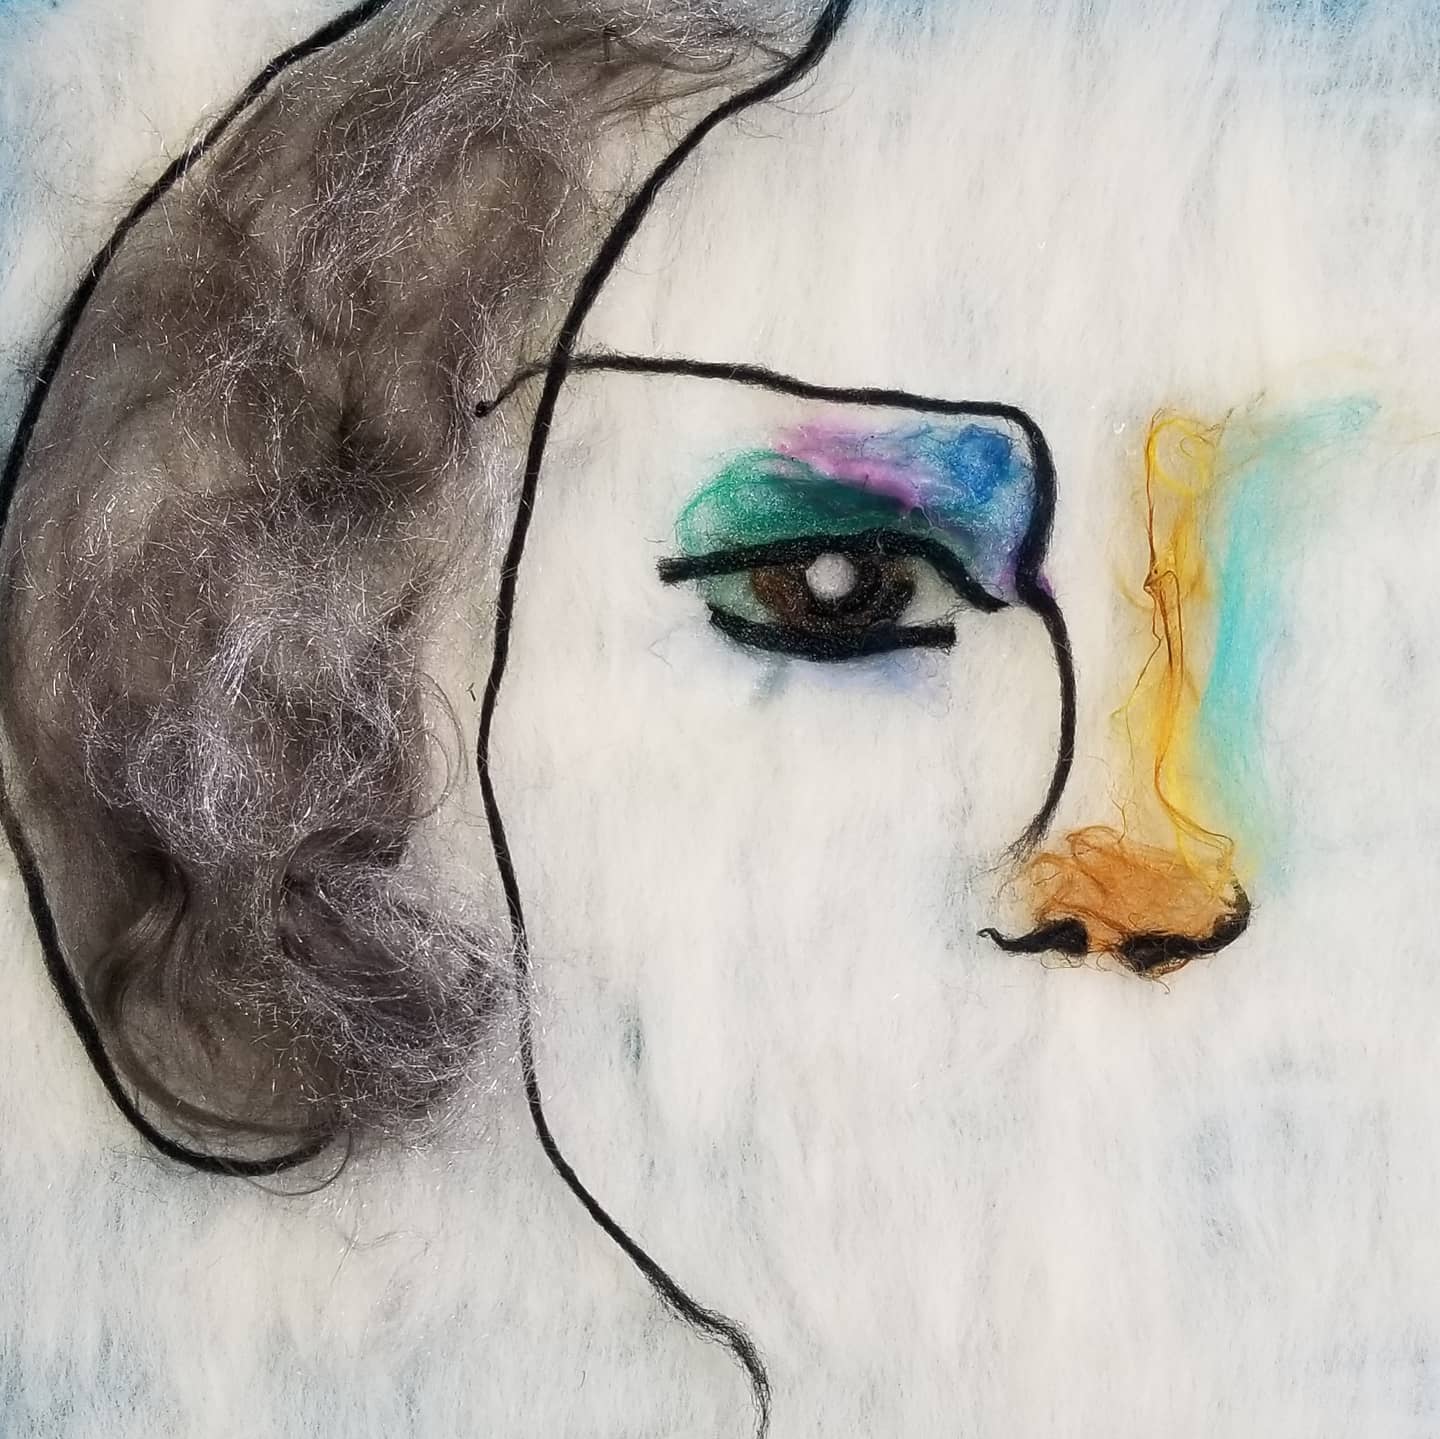 Fiber art picture of half a face with black hair